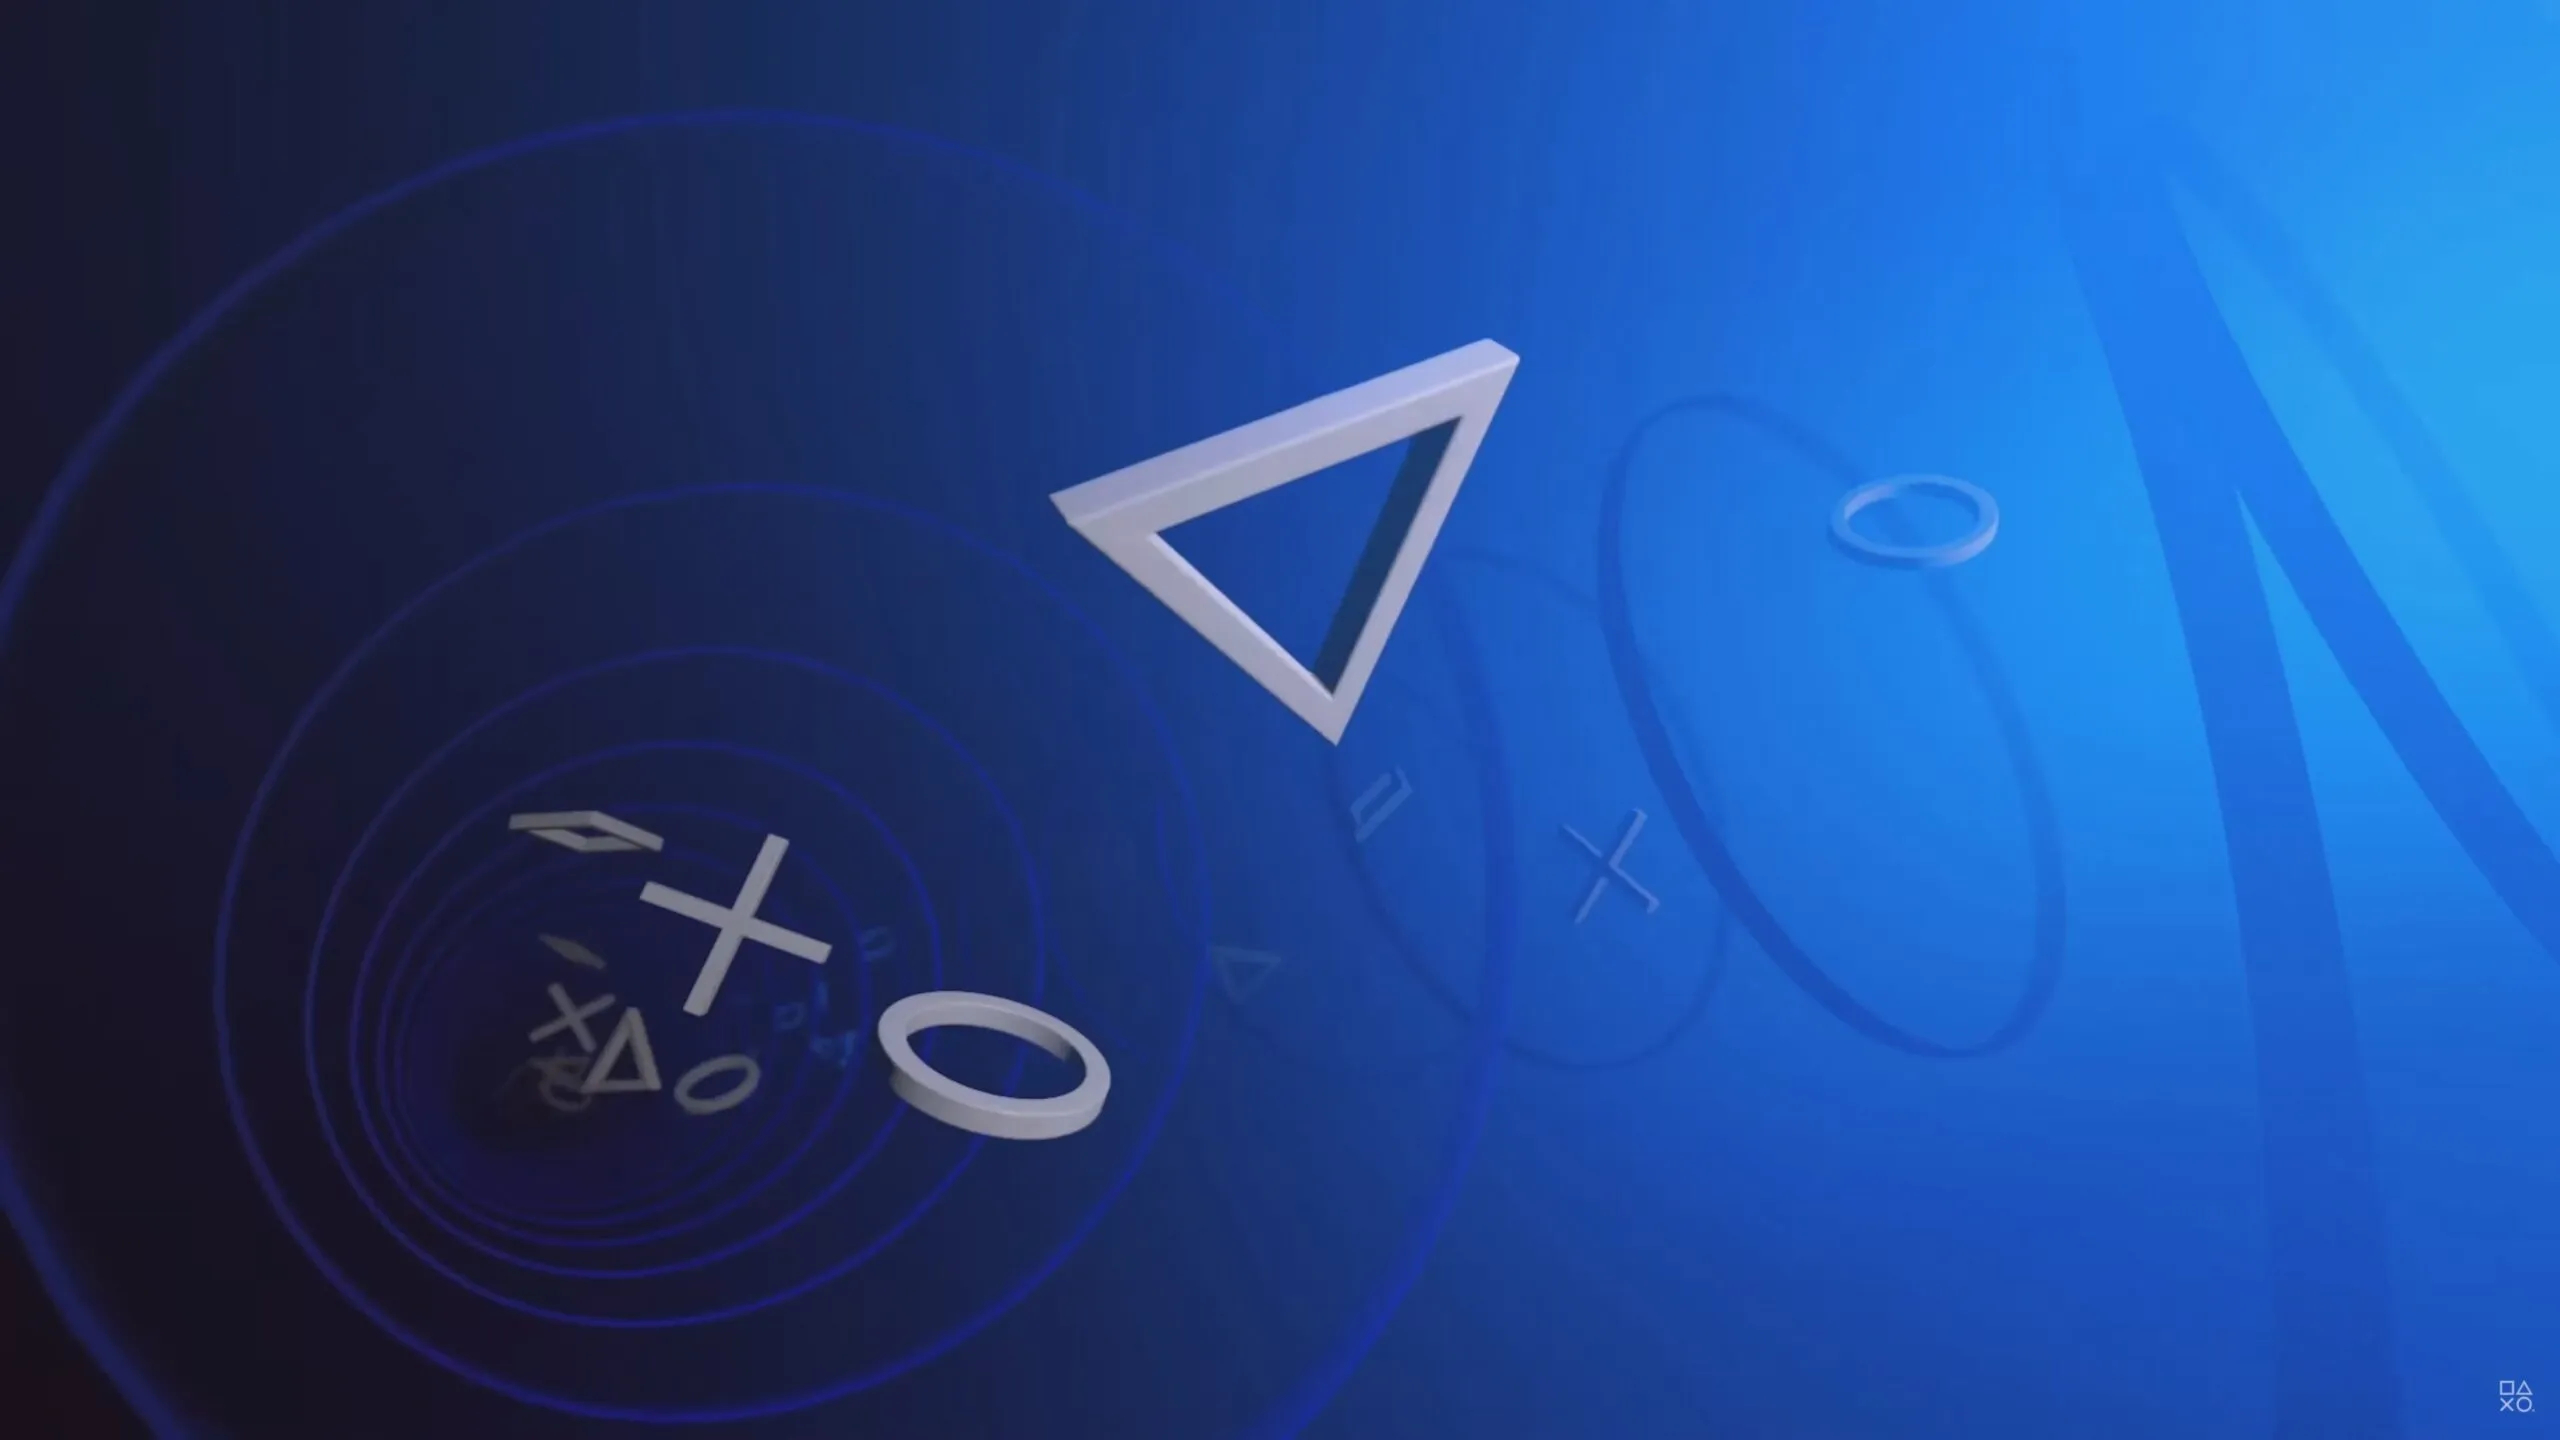 2560x1440 State of Play / Twenty PlayStation 5 wallpapers for fans RESPAWWN